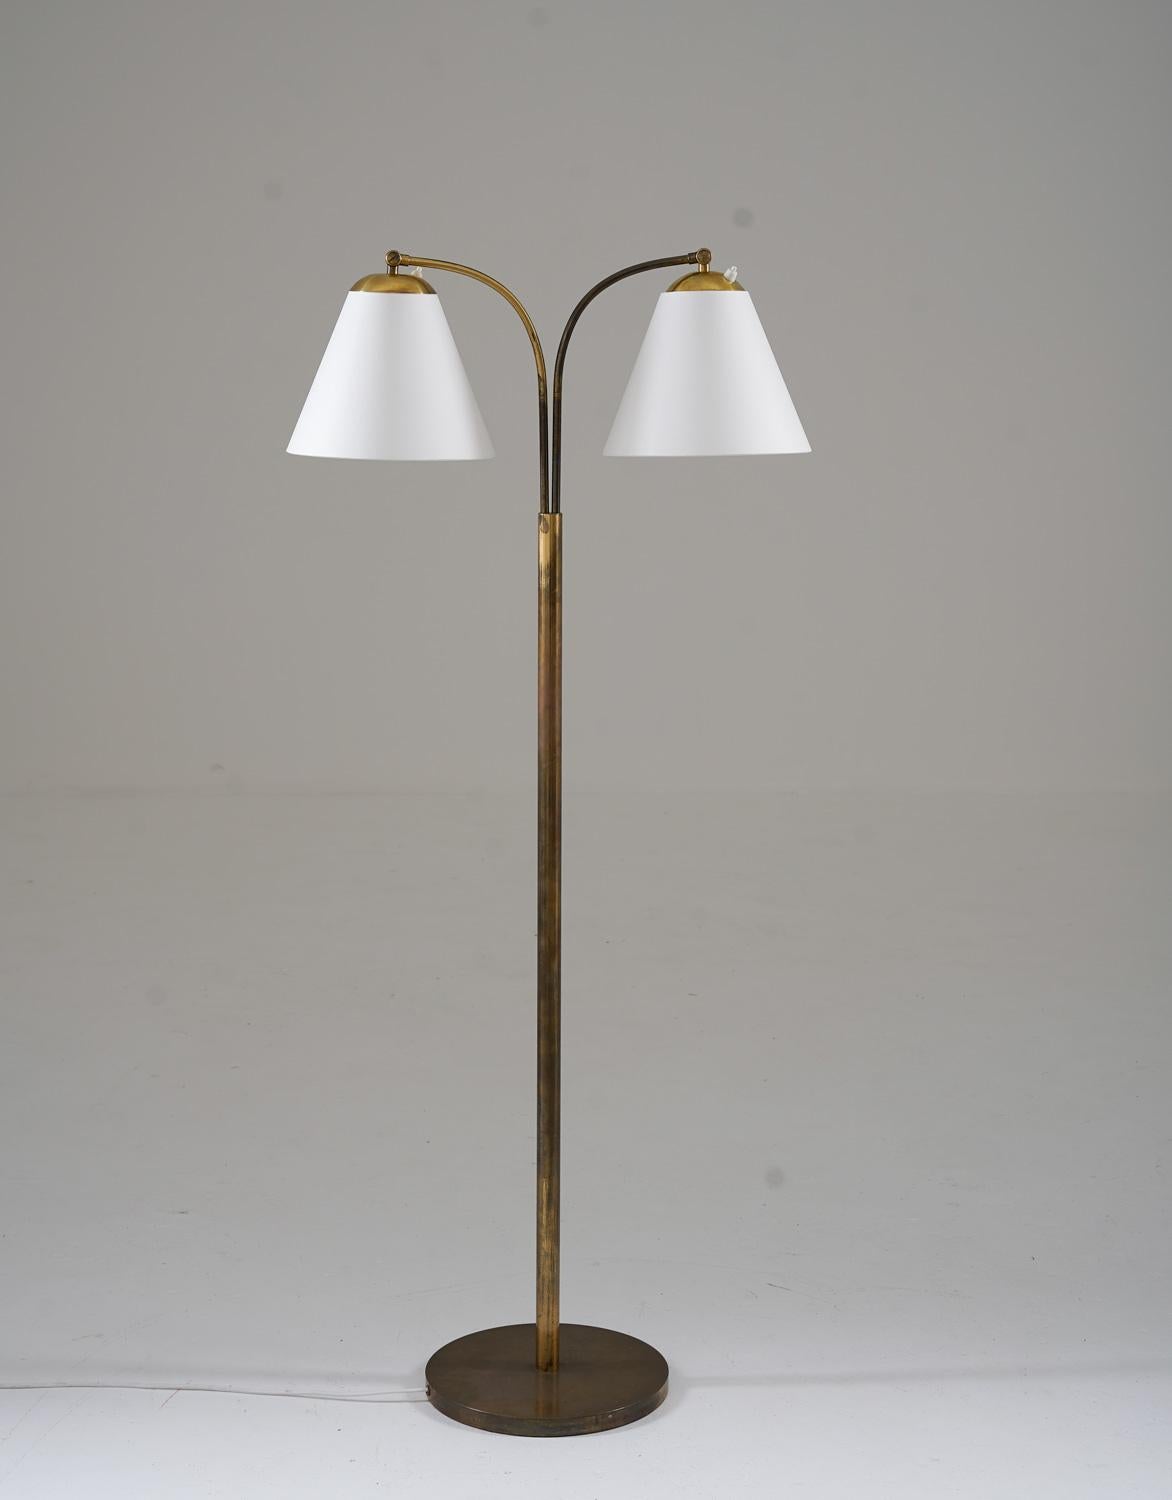 This is a lovely Swedish Modern floor lamp that was manufactured in Sweden during the 1940s. The lamp features a brass base and rod, which supports two swivel arms that hold the shades. The swivel arms are adjustable in height, making it easy to